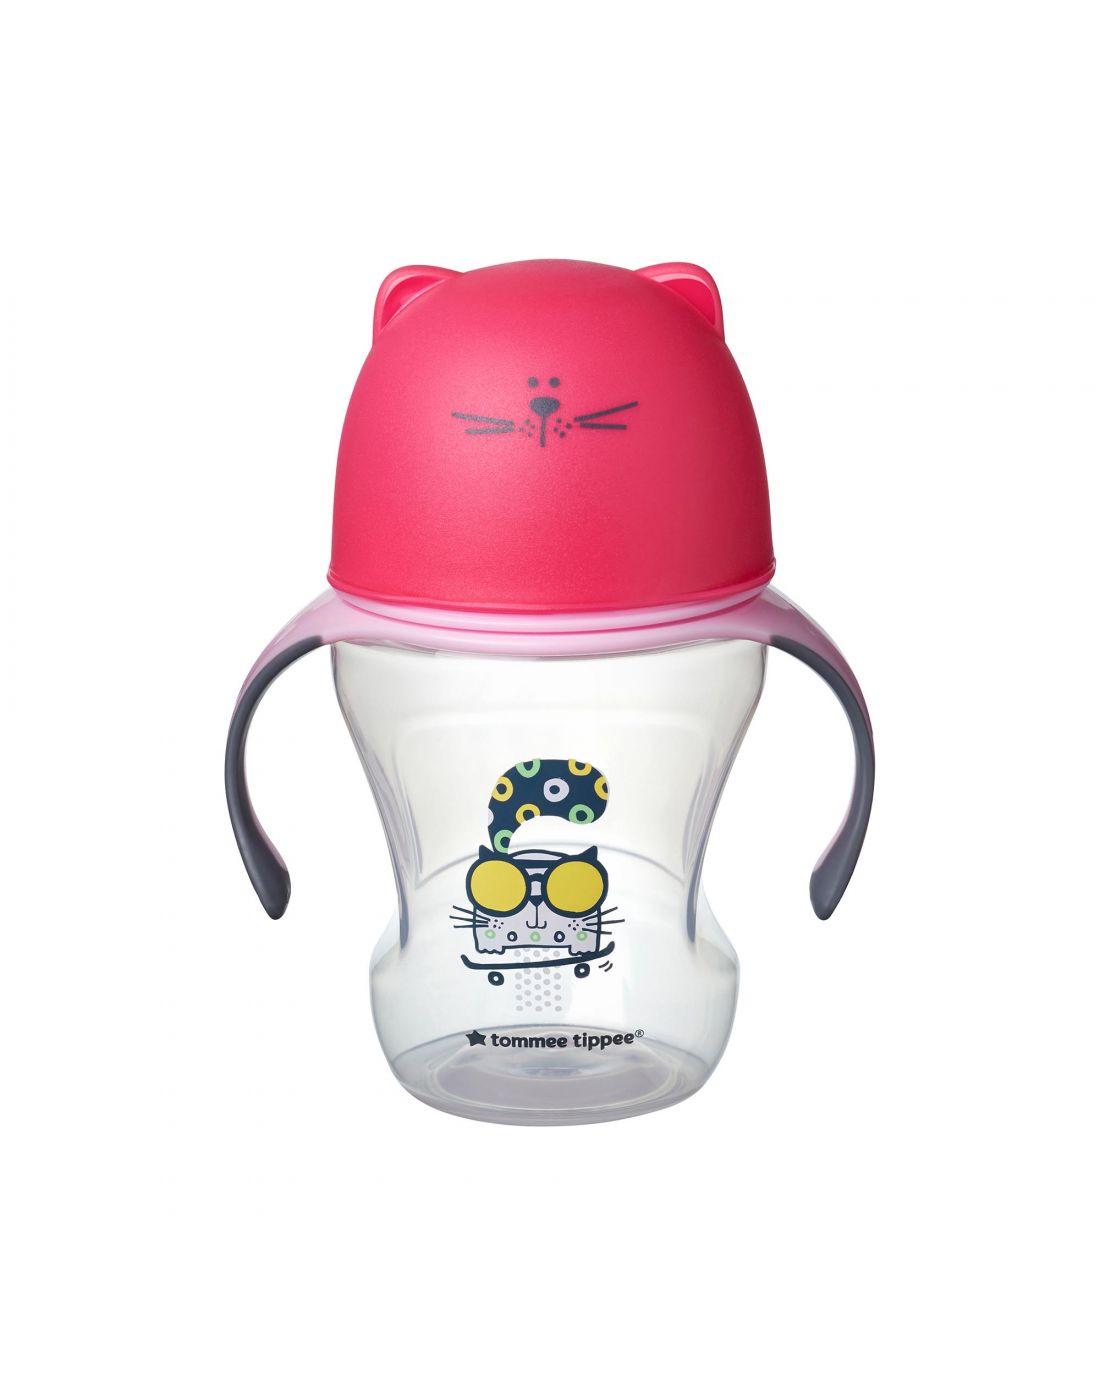 Tommee Tippee Kids Training Cup with Soft Sippee and Handles Blue 230ml 6m+